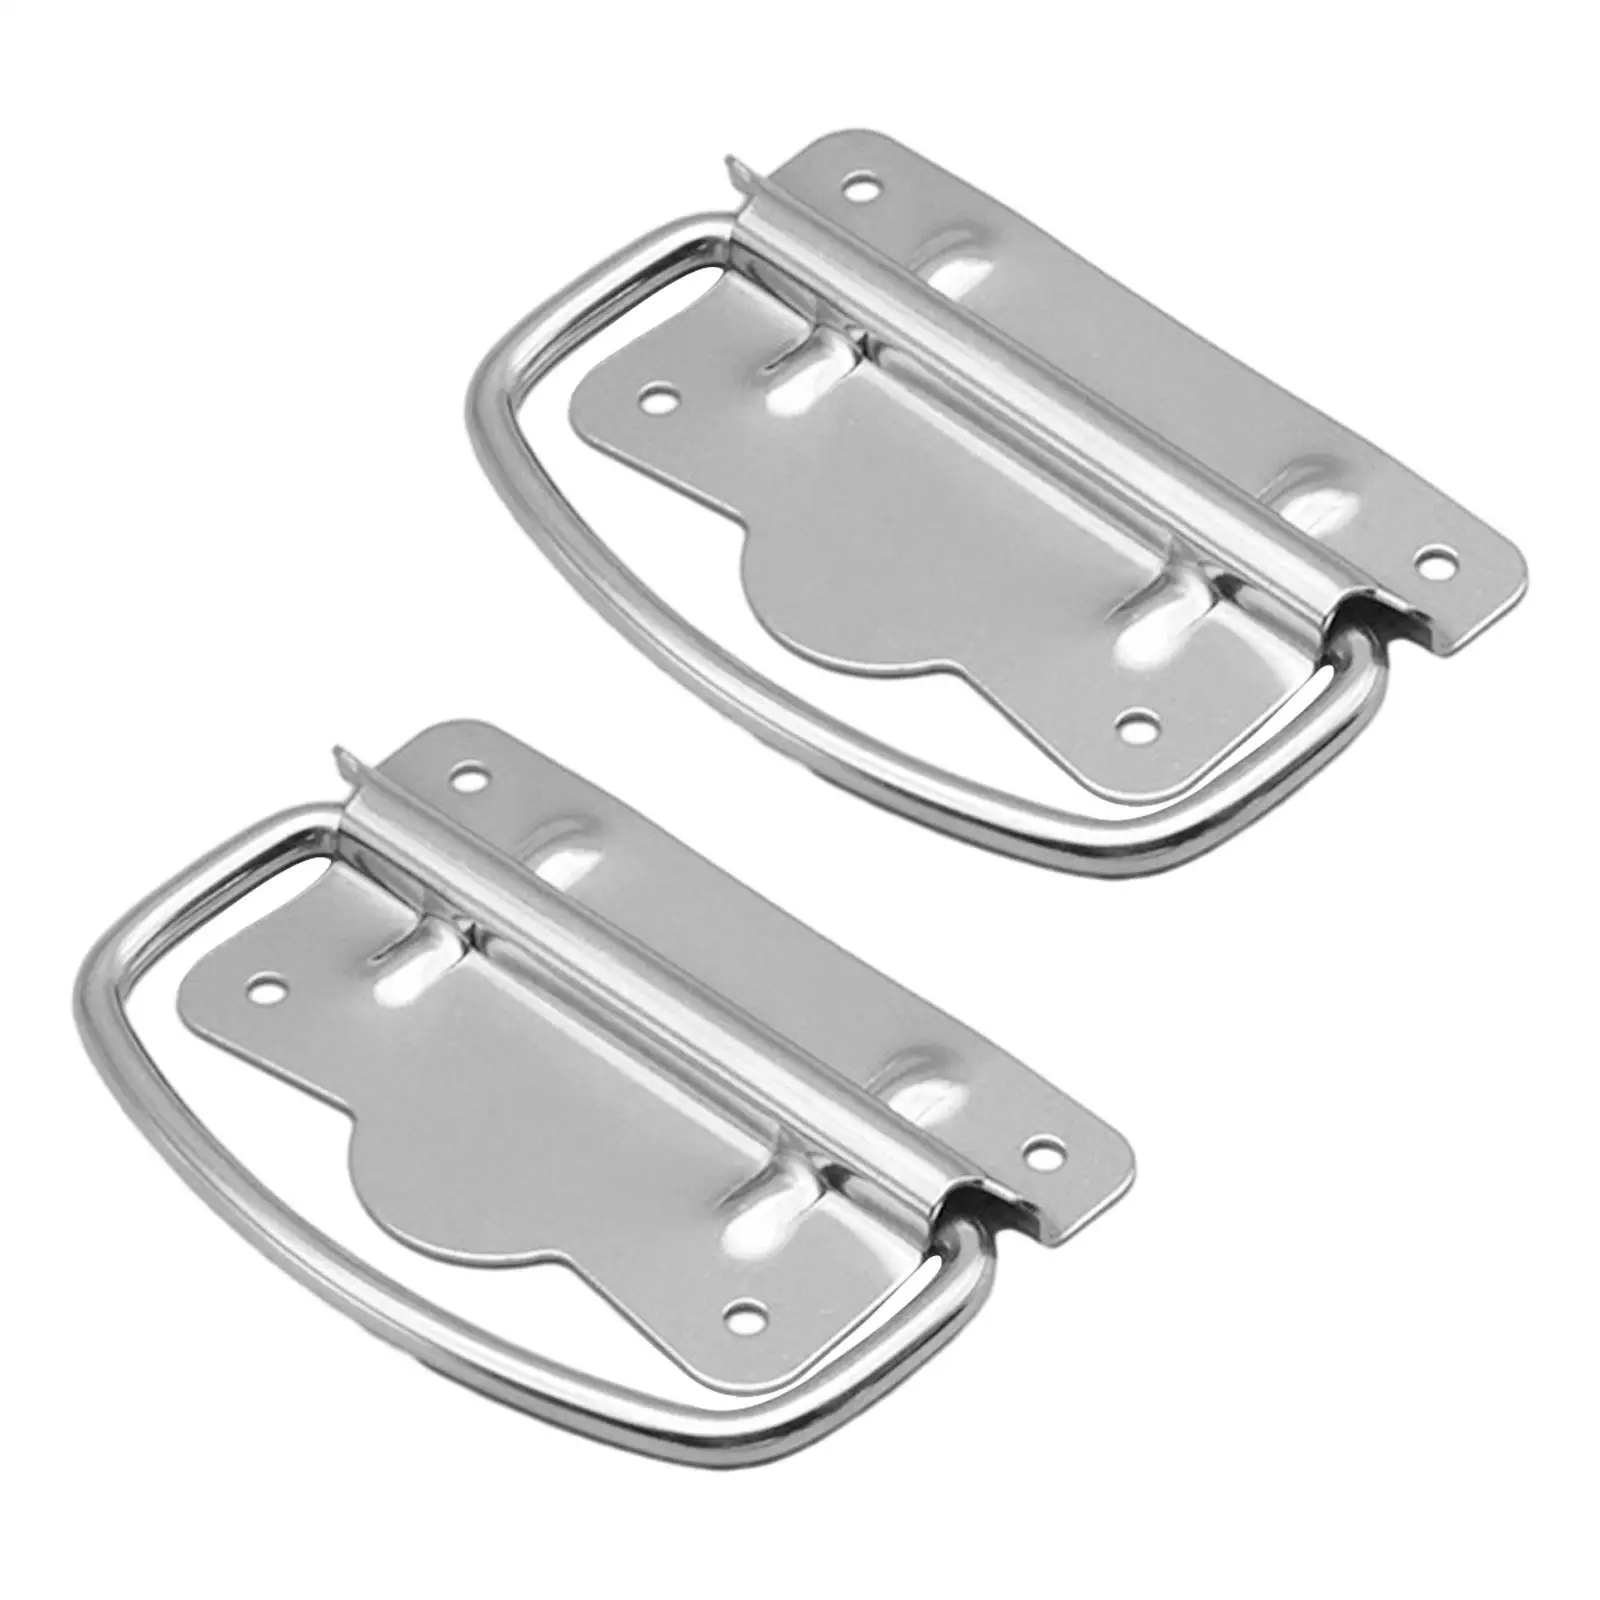 2x Stainless Steel Rings Folding Pull Handle Stainless Steel Foldable Boat Latch for Dresser Door Chest Cabinet Wardrobe Drawers